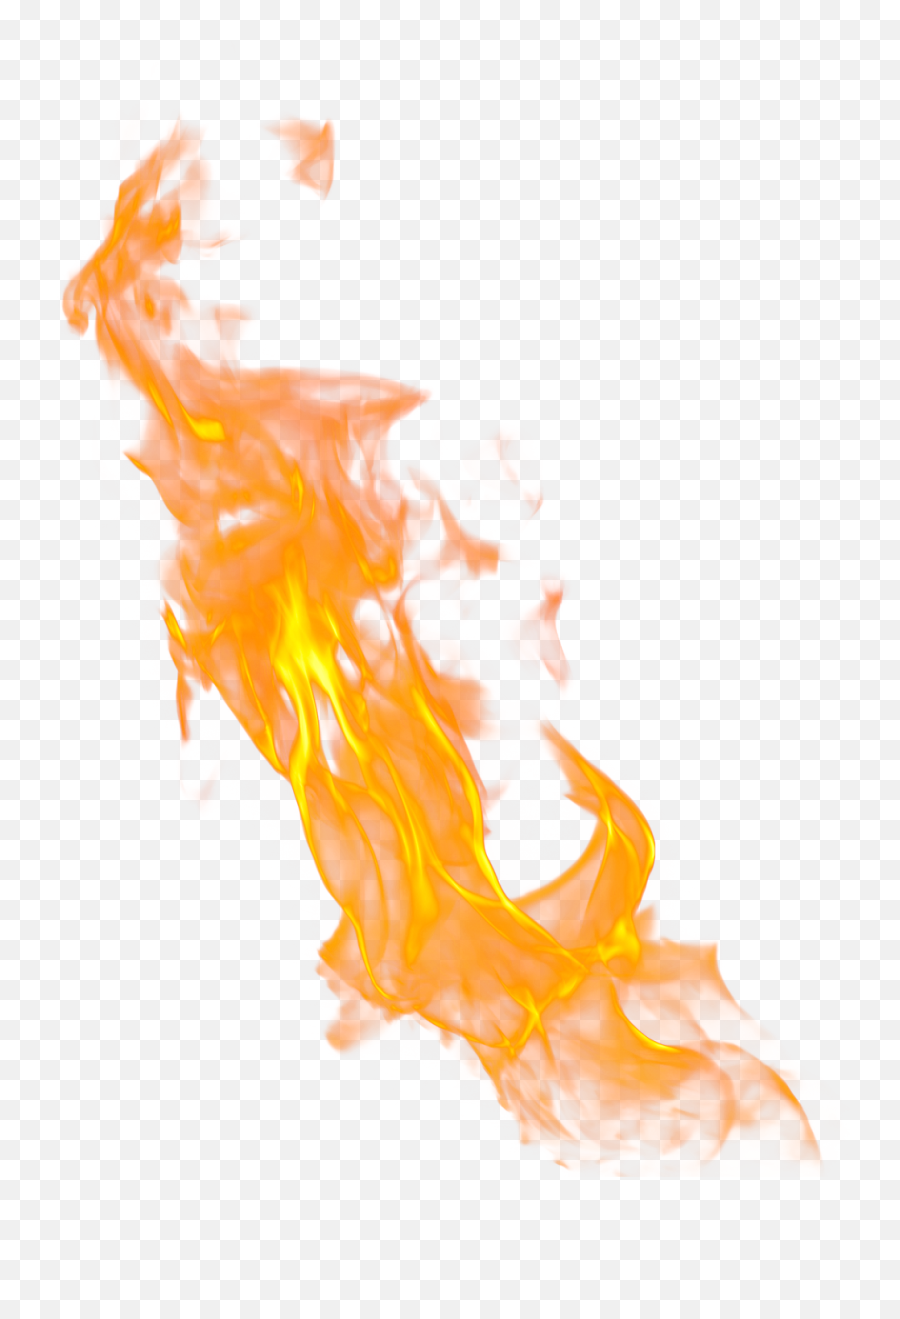 Where Is Fire Png Lighter Flame